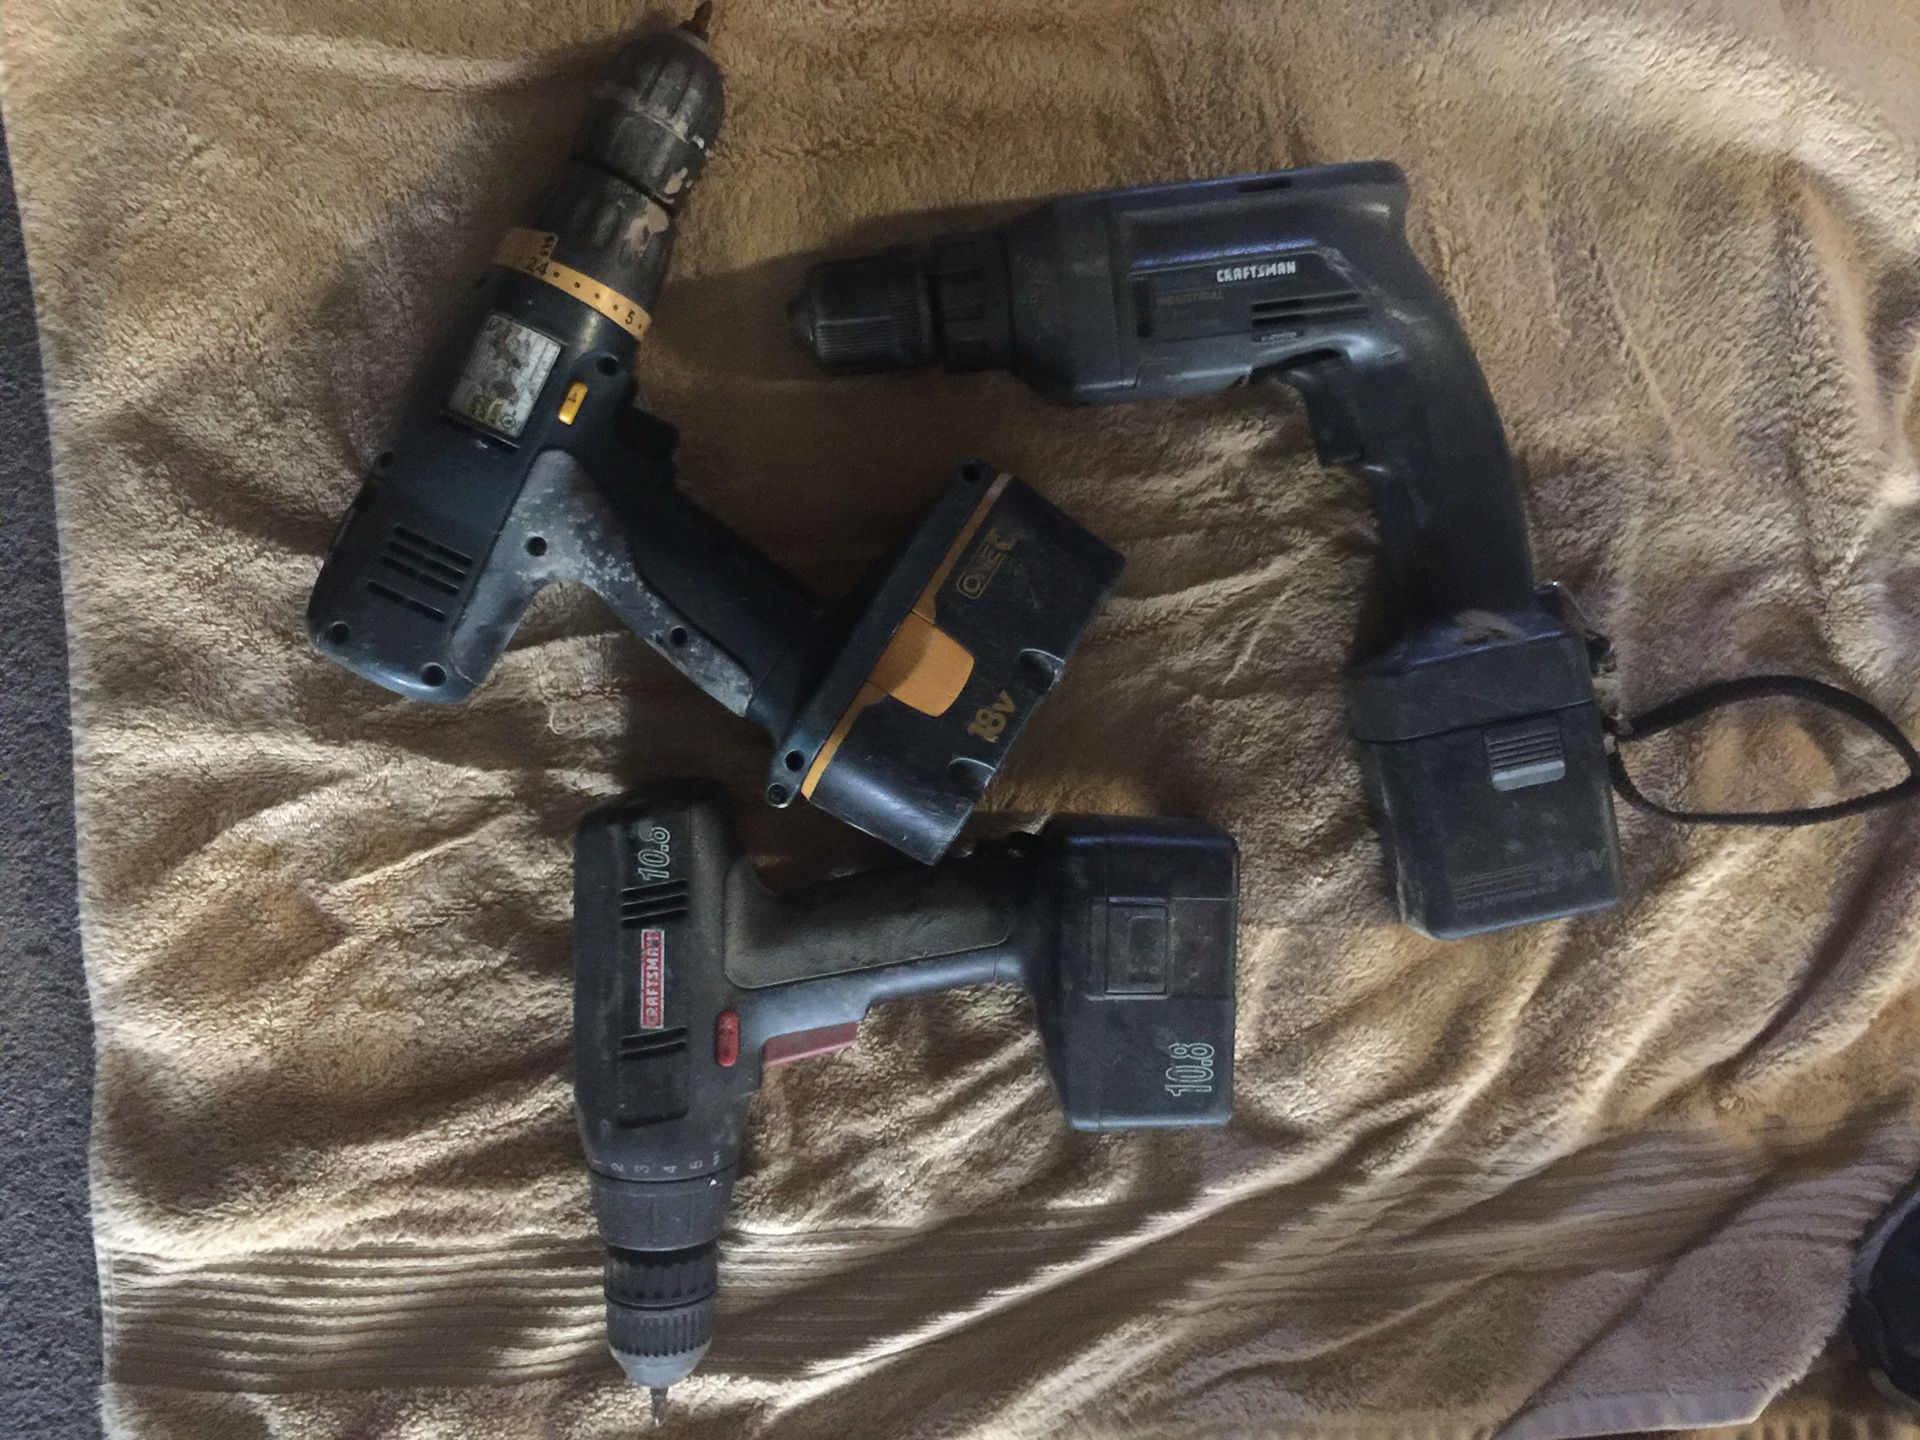 3drills 2craftsman and 1 Ryioby all have battery but needs charger all $15